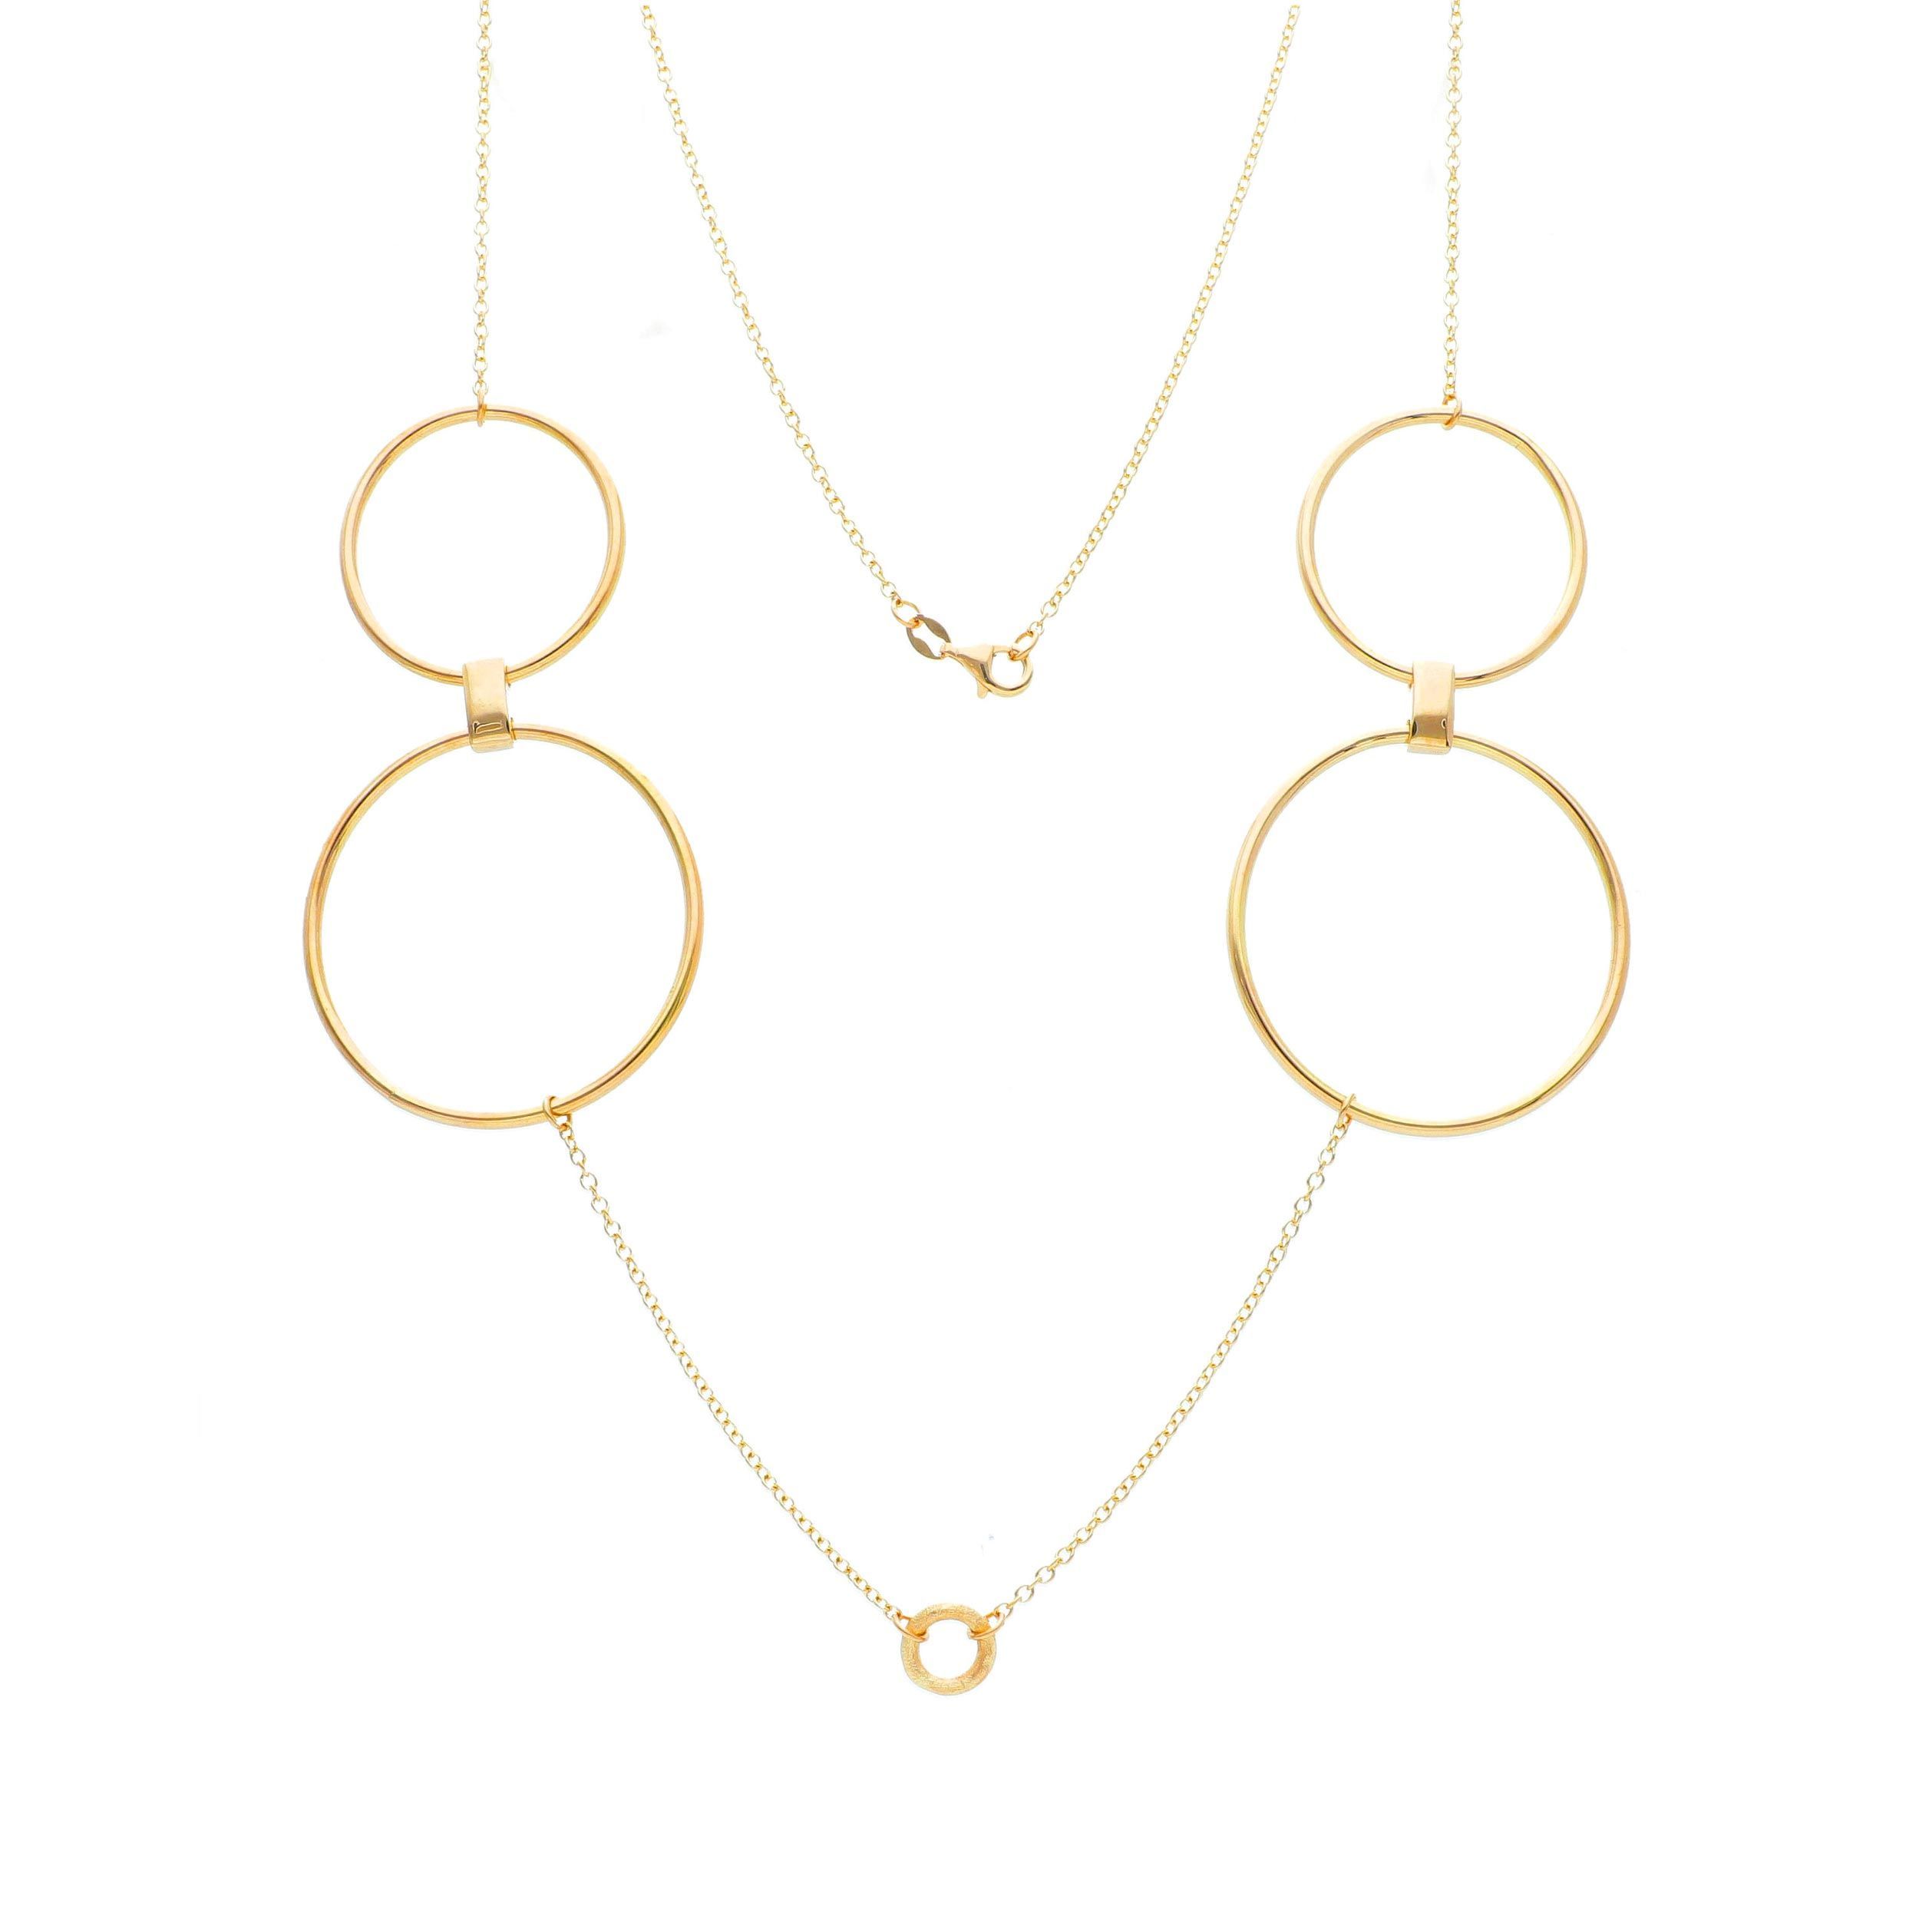 Golden necklace k14 with cycles (code S246031)